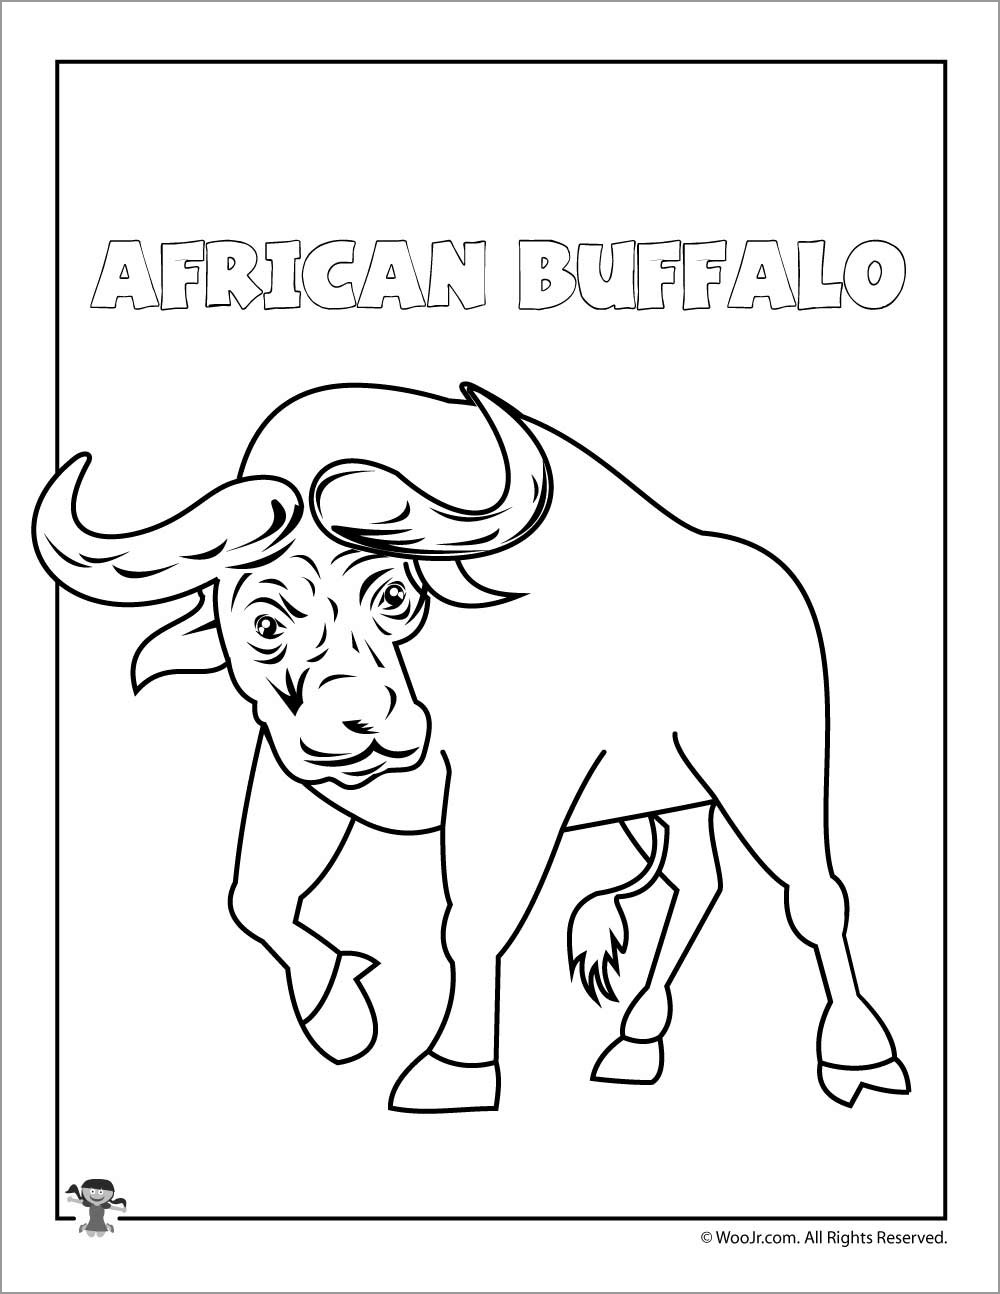 African Buffalo Coloring Page